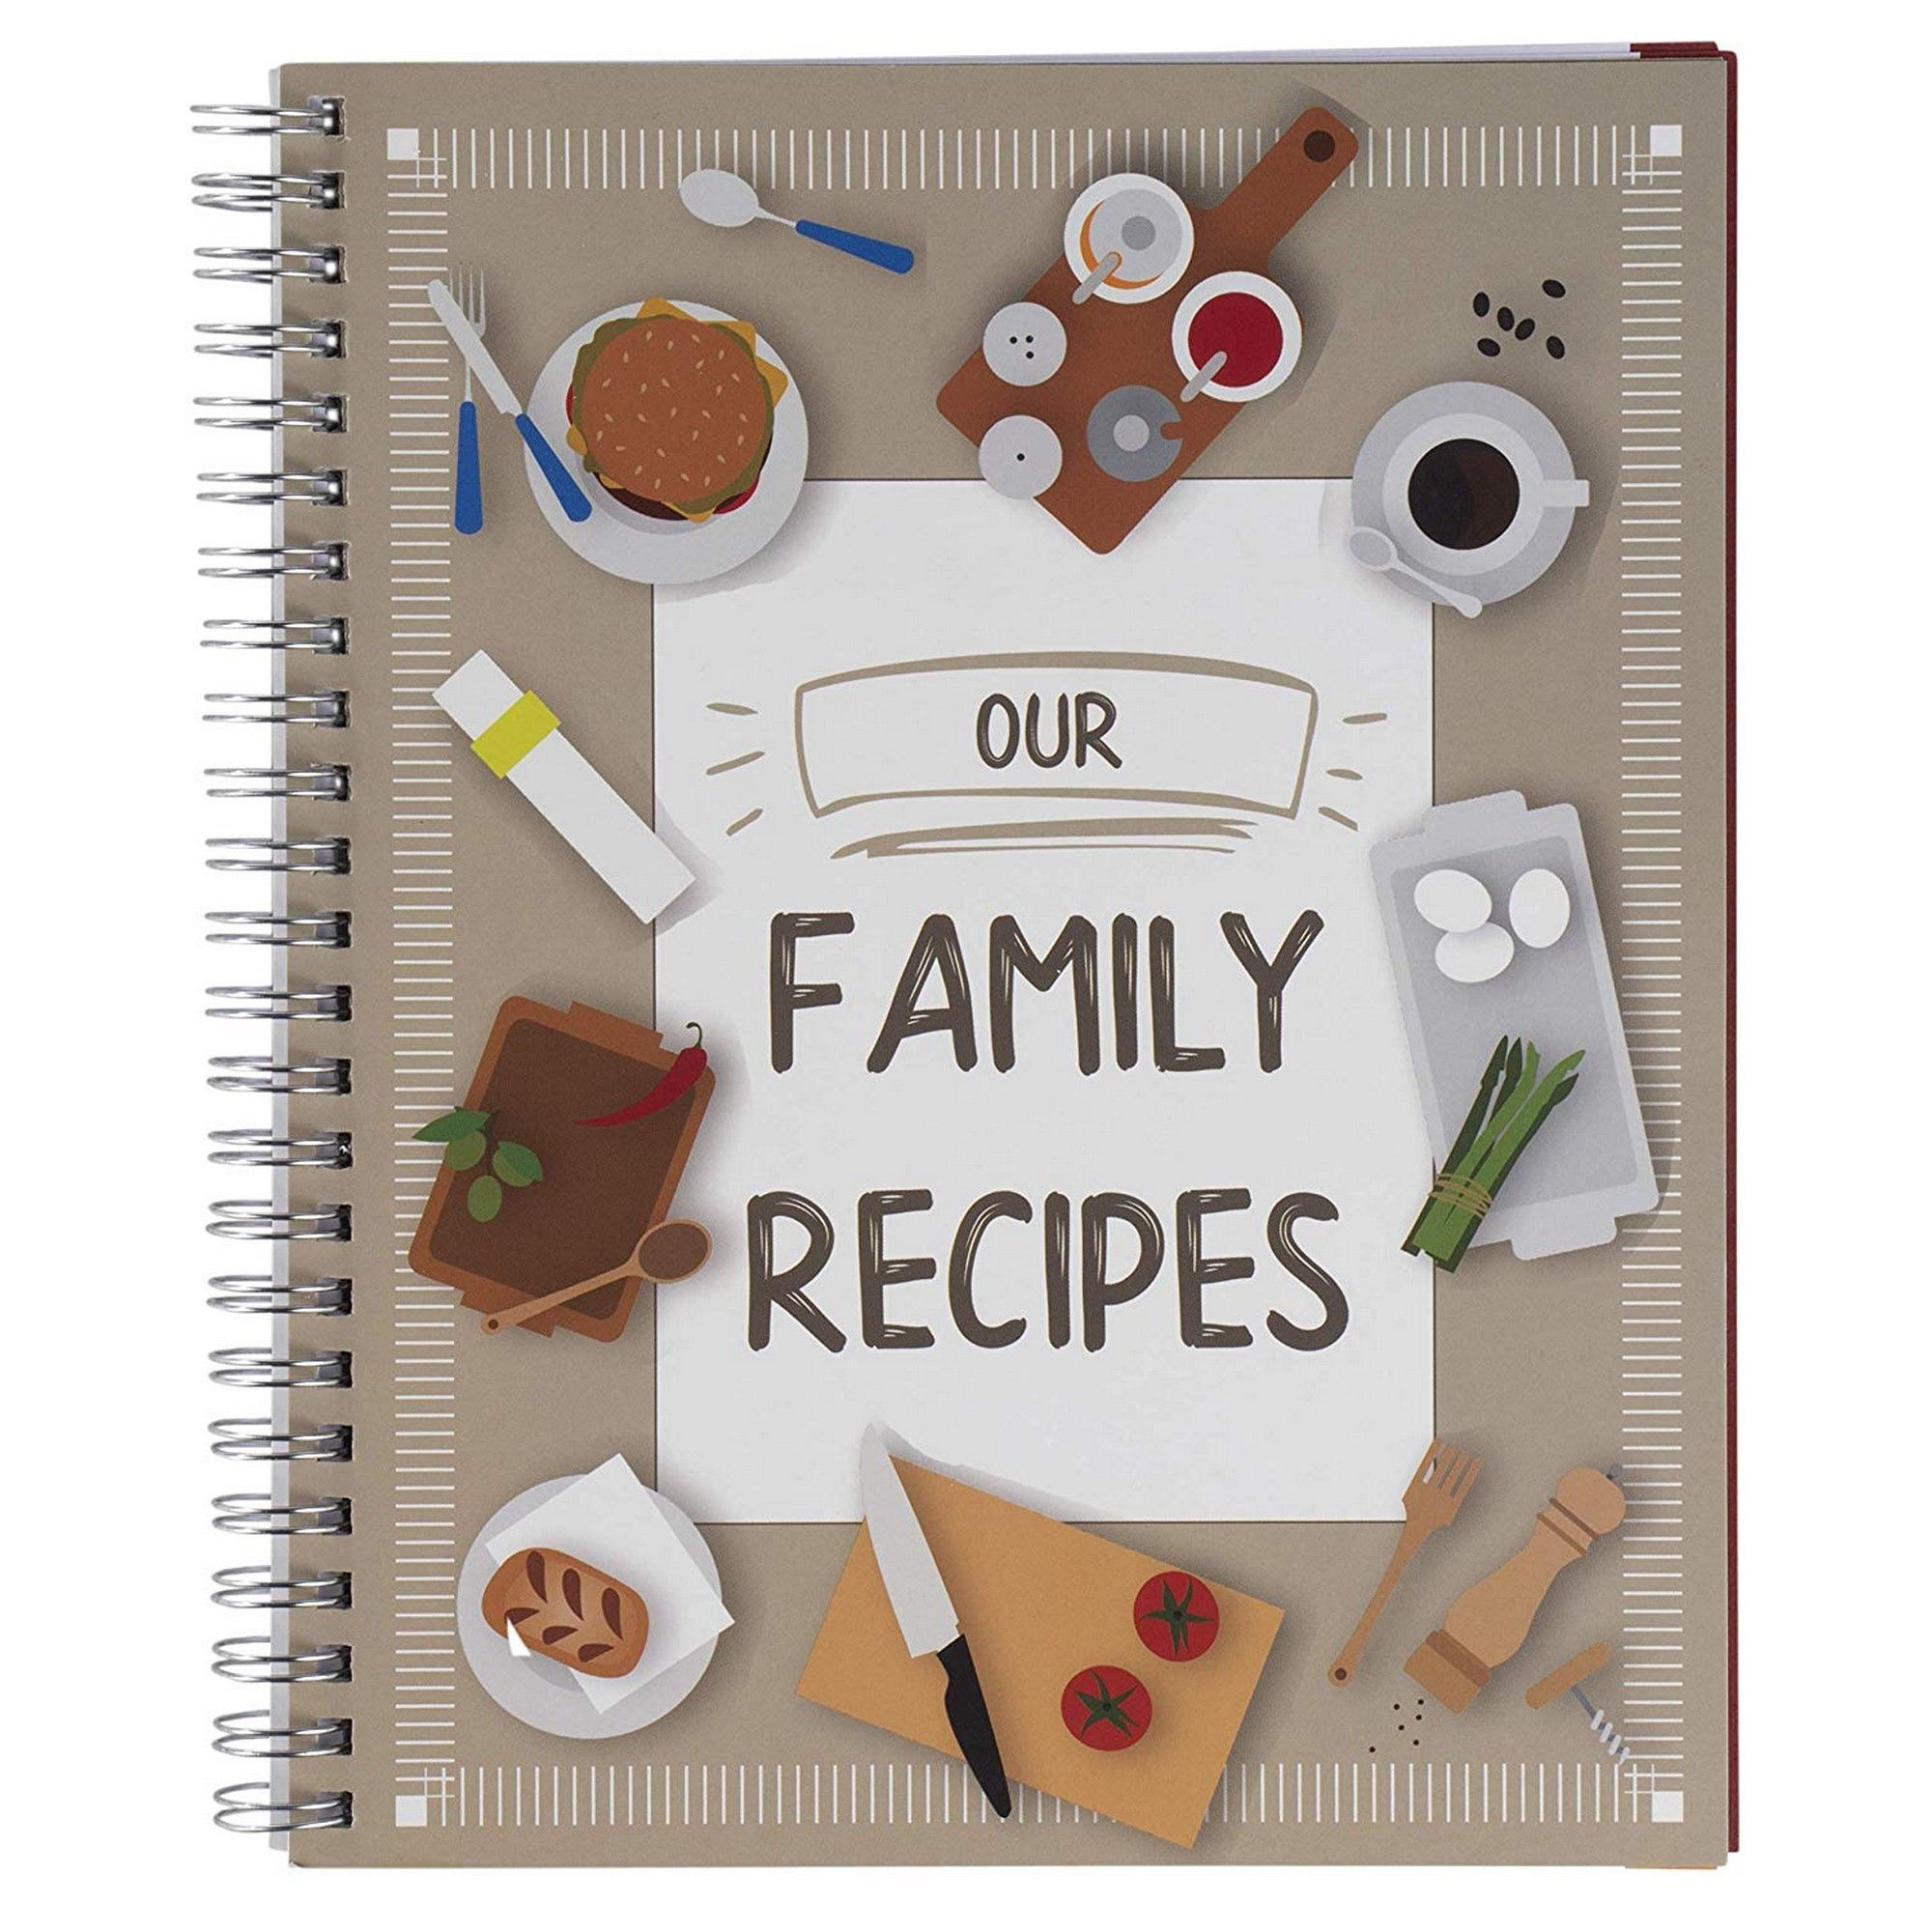 Family recipes journal - special Christmas family gifts ($11.99)